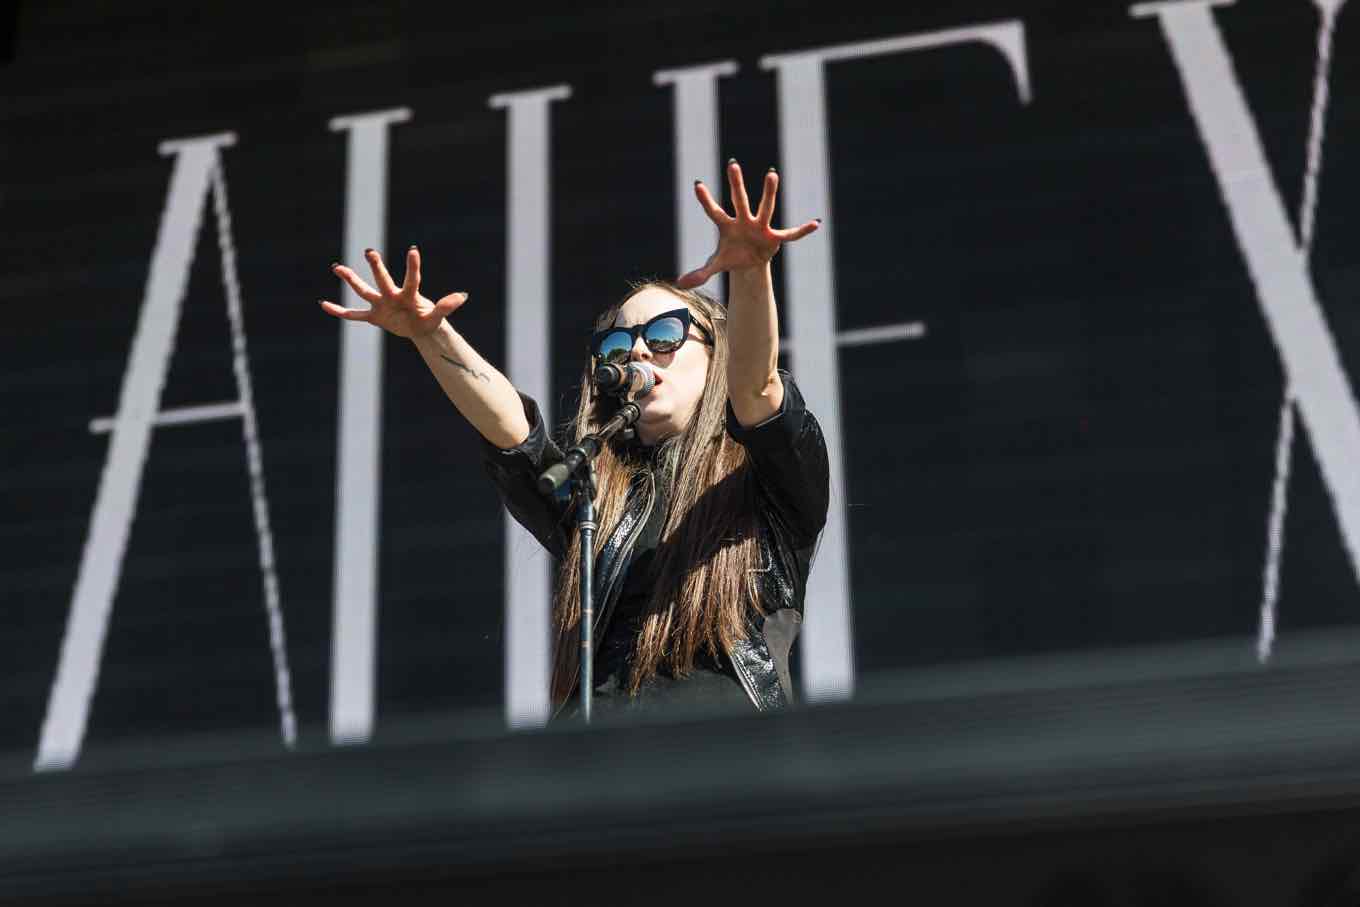 Allie X performs at Air + Style on February 20, 2016. (Photo credit: Air + Style) 